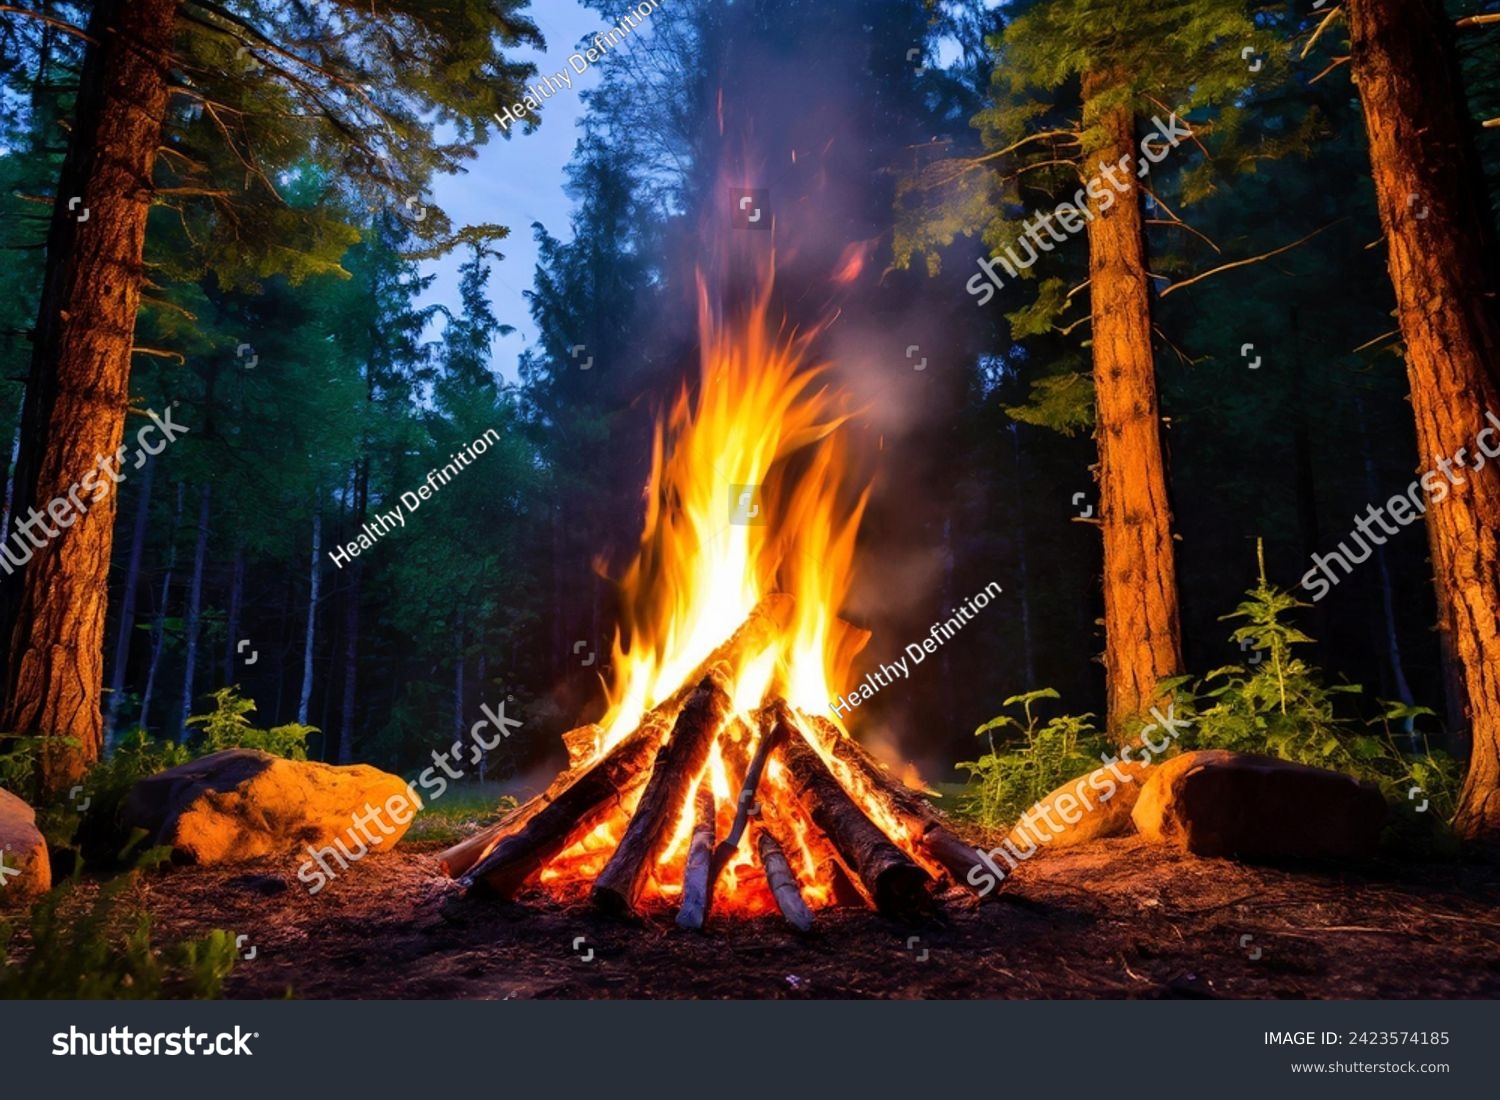 Burning campfire on a dark night in a forest. The bonfire burns in the forest. camp fire in the autumn during vacation in the mountains. Beautiful landscape of nature and trees. Sparks and flames.
 #2423574185